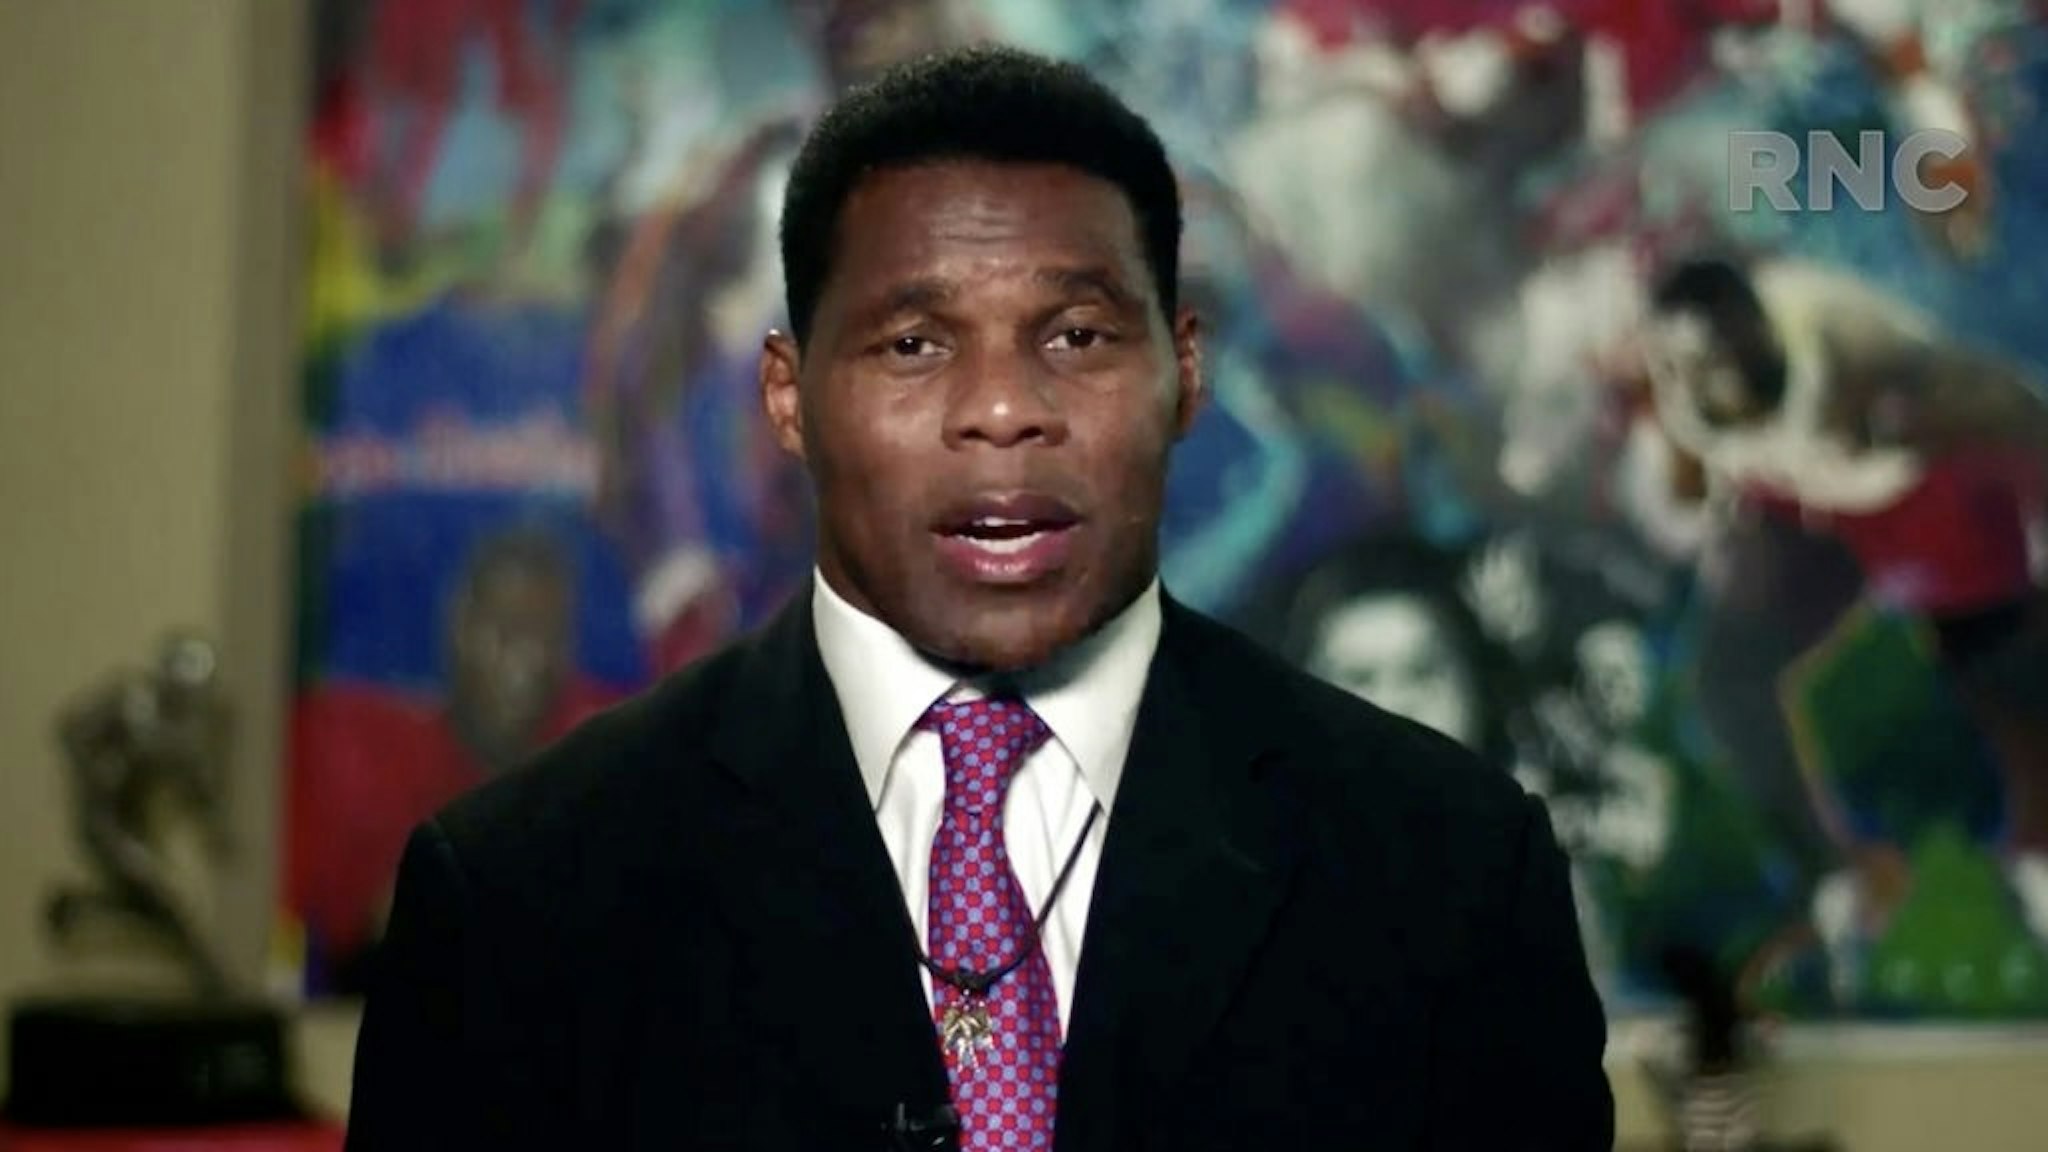 Republicans Hold Virtual 2020 National Convention CHARLOTTE, NC - AUGUST 24: (EDITORIAL USE ONLY) In this screenshot from the RNC’s livestream of the 2020 Republican National Convention, former NFL athlete Herschel Walker addresses the virtual convention on August 24, 2020. The convention is being held virtually due to the coronavirus pandemic but will include speeches from various locations including Charlotte, North Carolina and Washington, DC. (Photo Courtesy of the Committee on Arrangements for the 2020 Republican National Committee via Getty Images) Handout / Handout via Getty Images